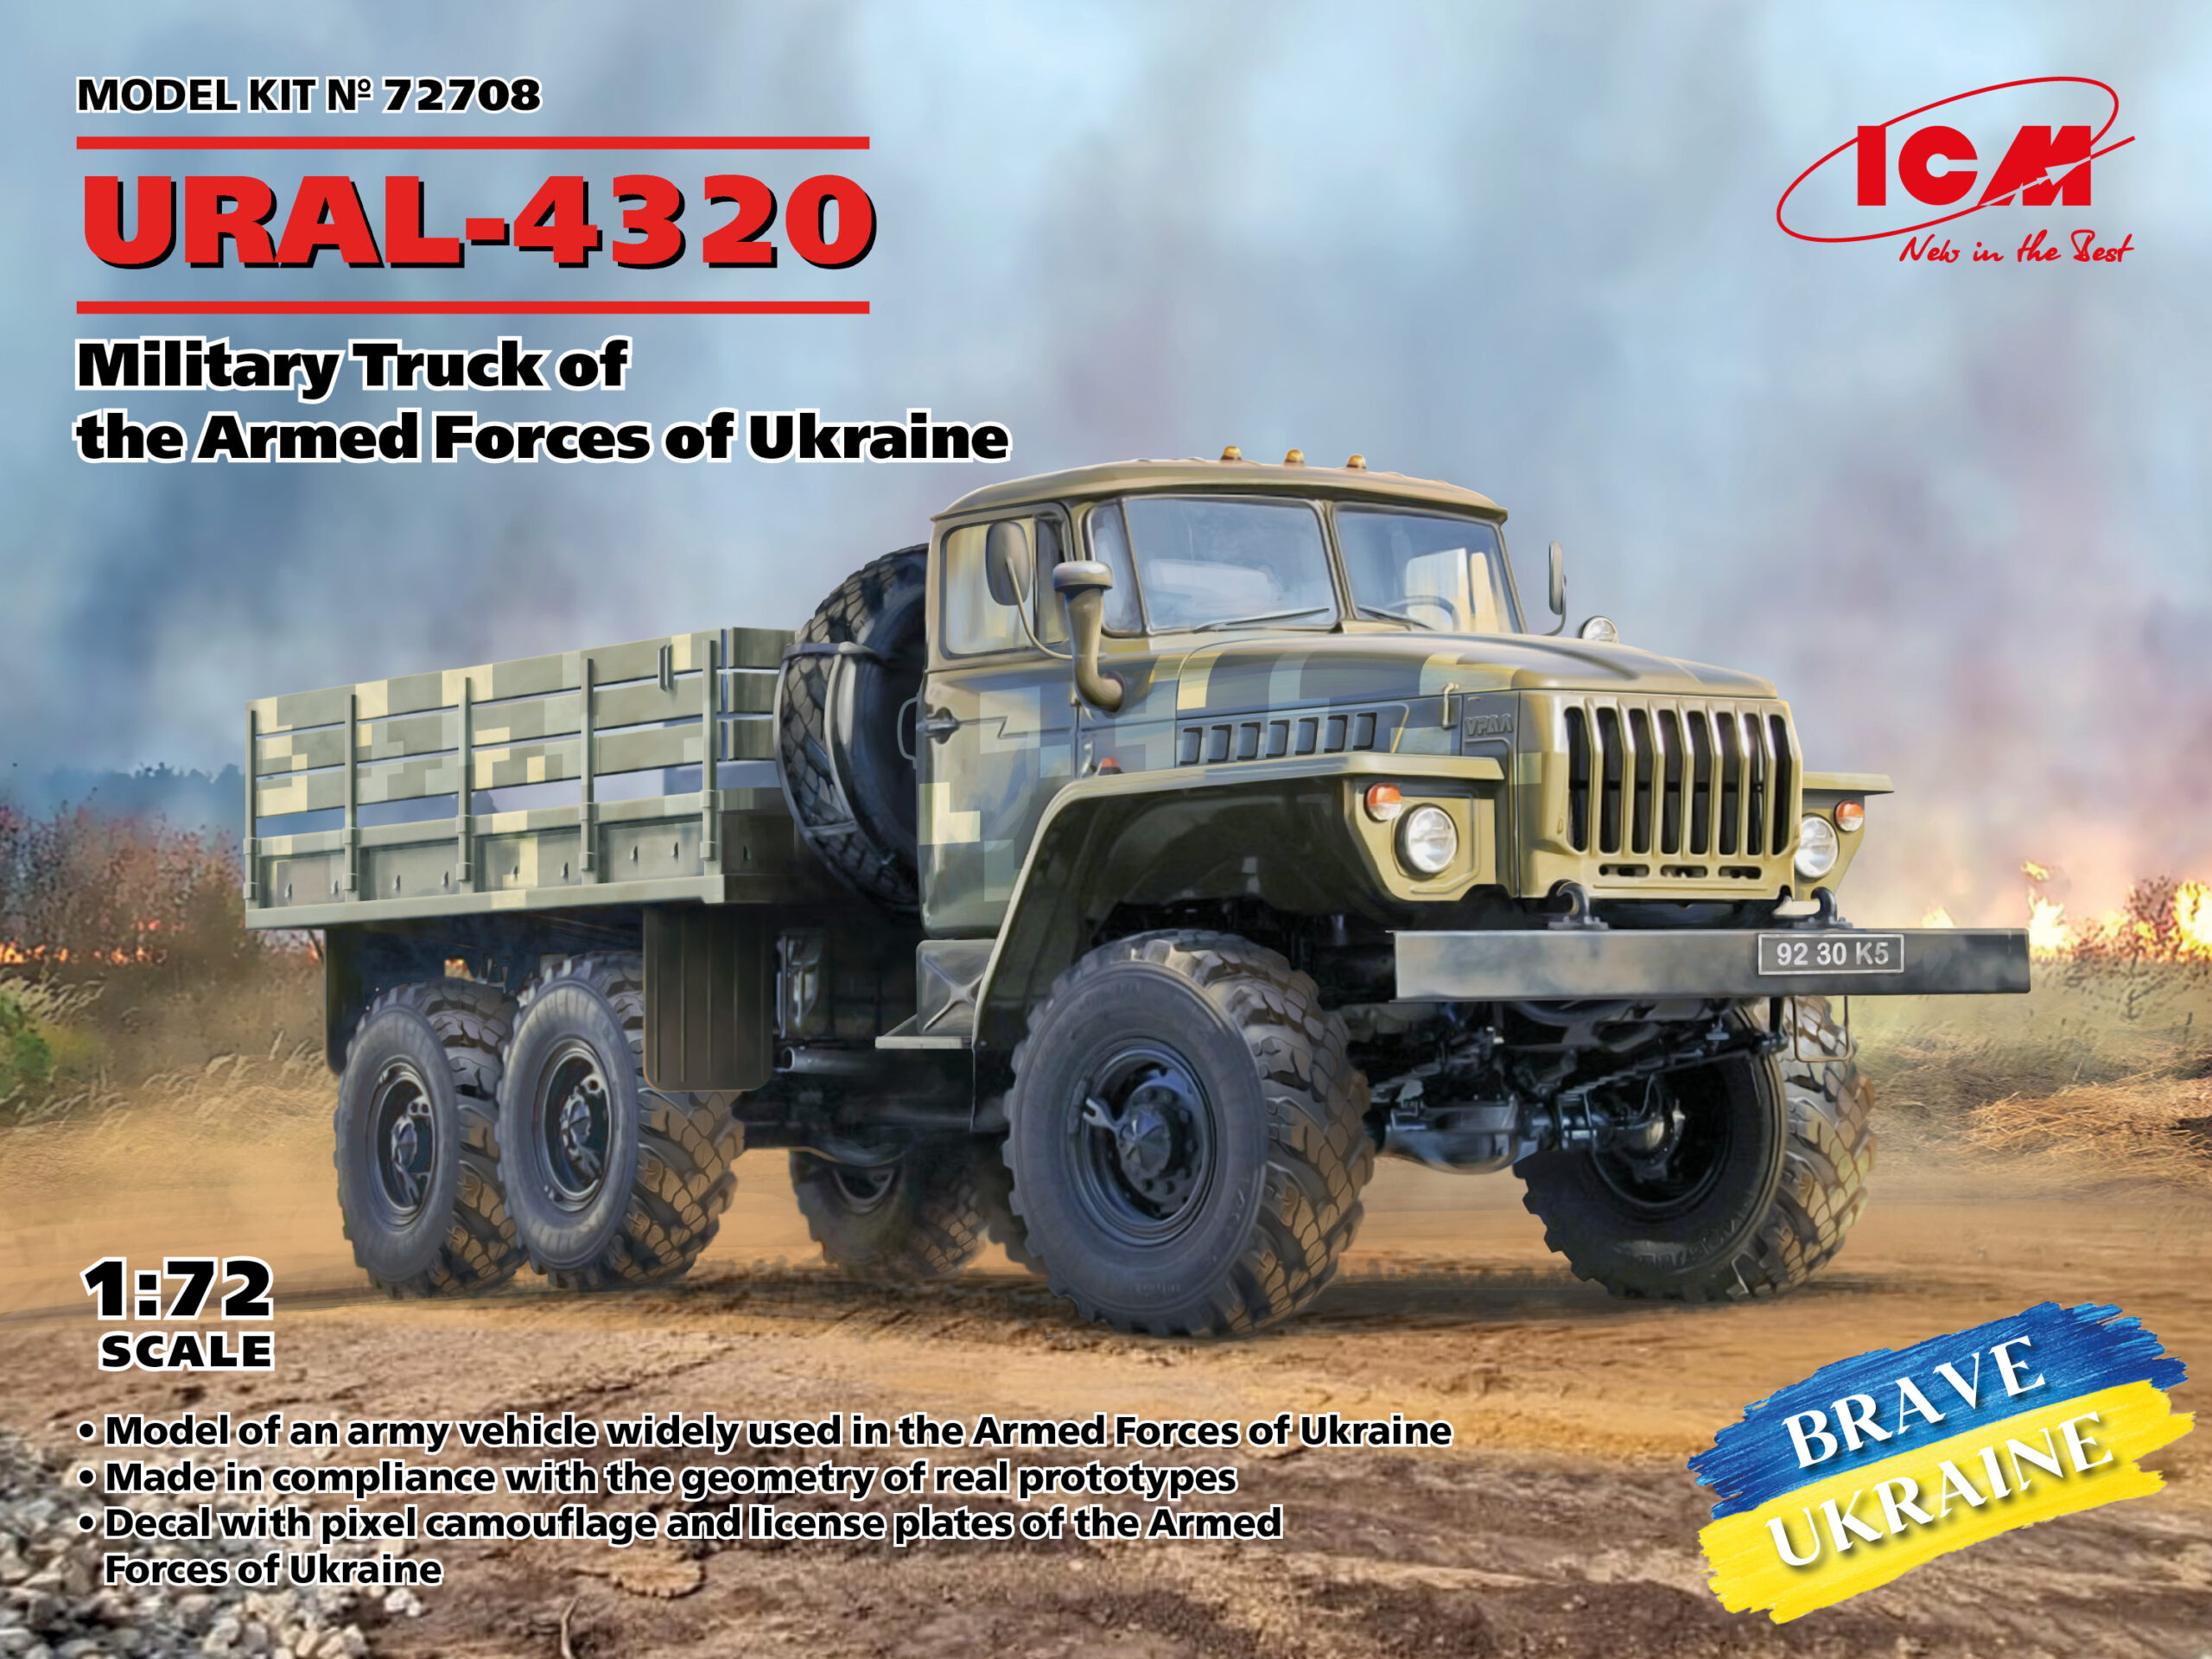 1:72 ICM URAL-4320, Military Truck of the Armed Forces of Ukraine